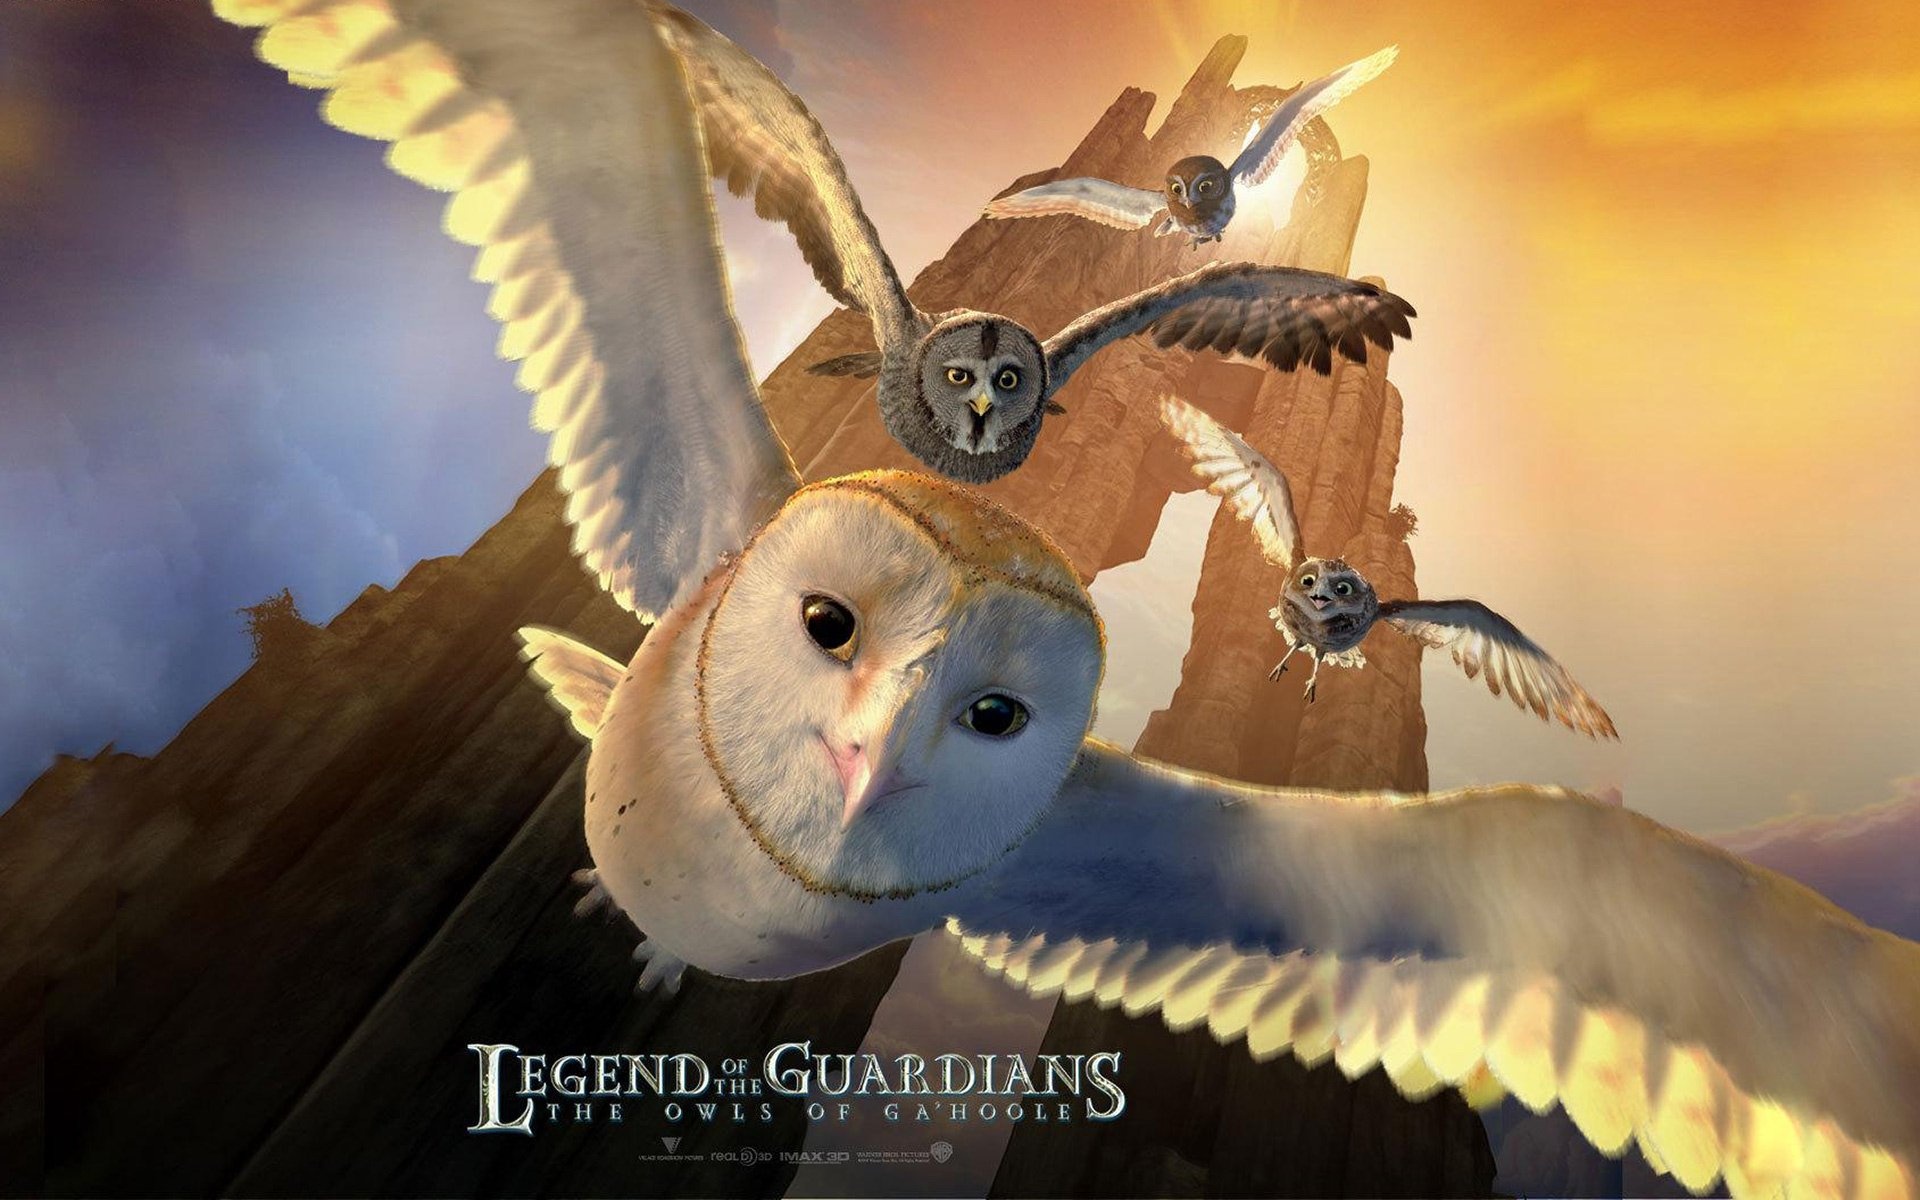 Legend of the Guardians: The Owls of Ga'Hoole, Stunning wallpapers, Breathtaking visuals, Majestic owls, 1920x1200 HD Desktop